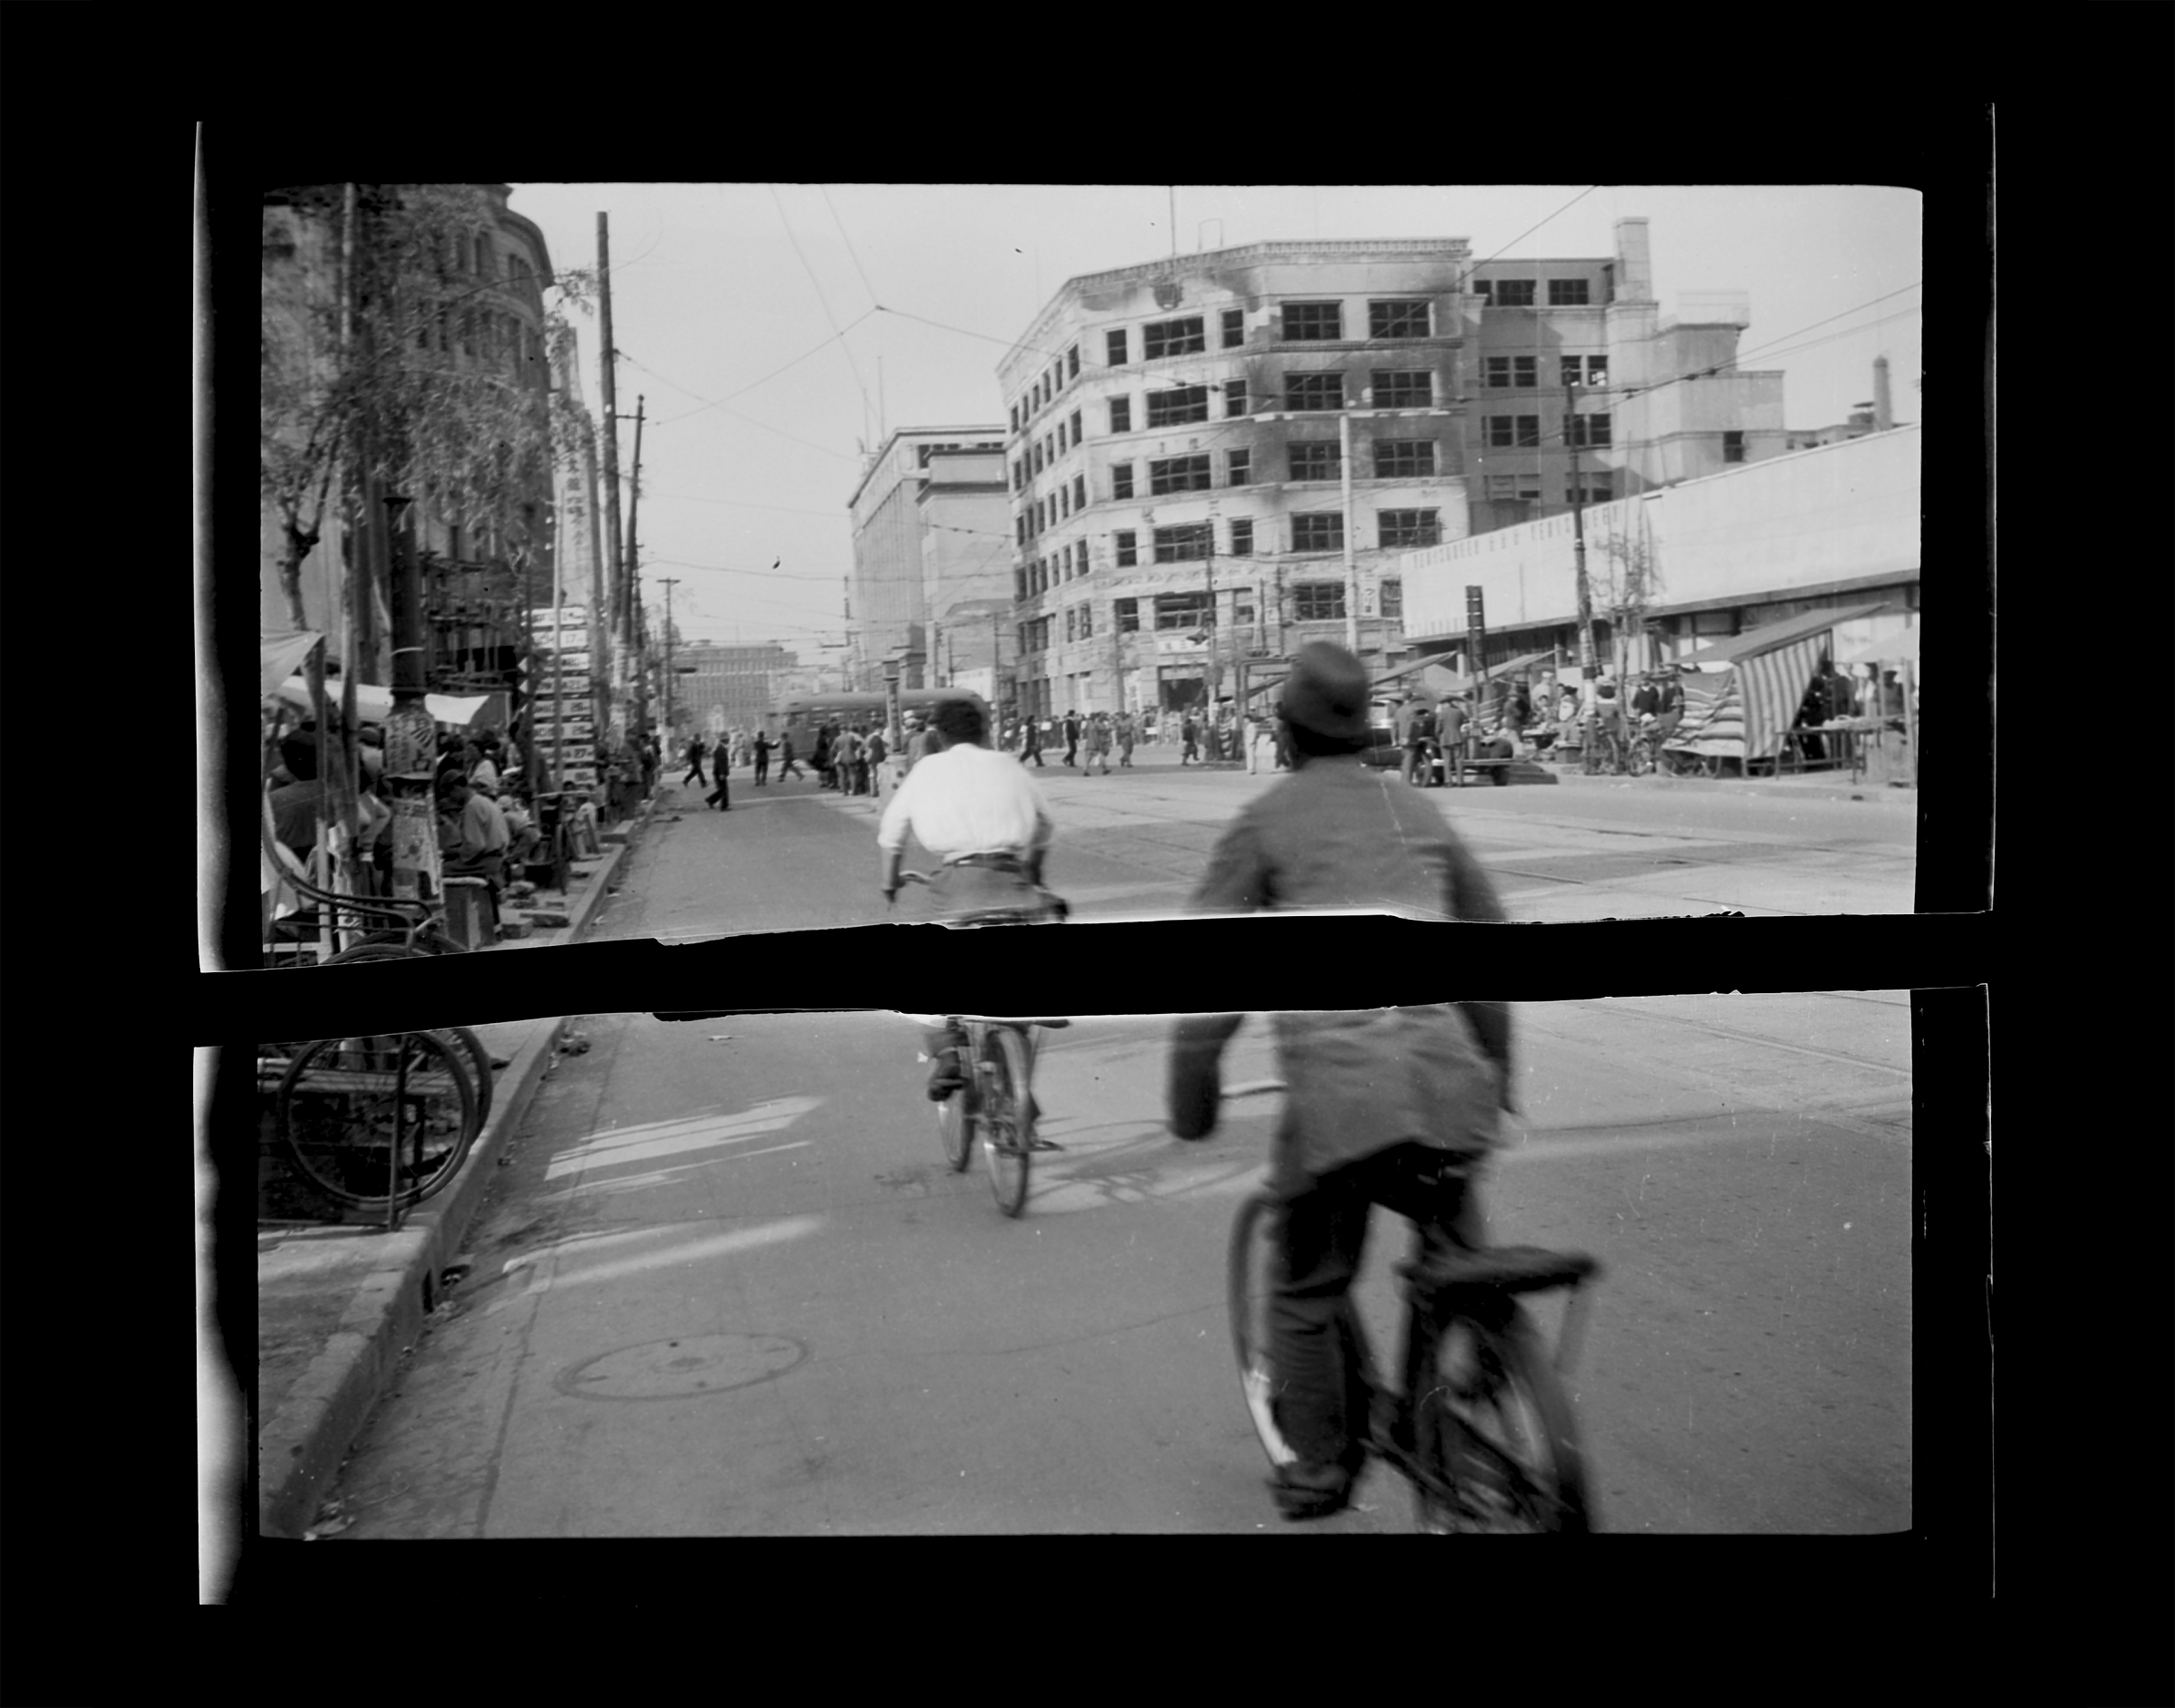 A black-and-white 1940s photograph of people riding bikes down a street